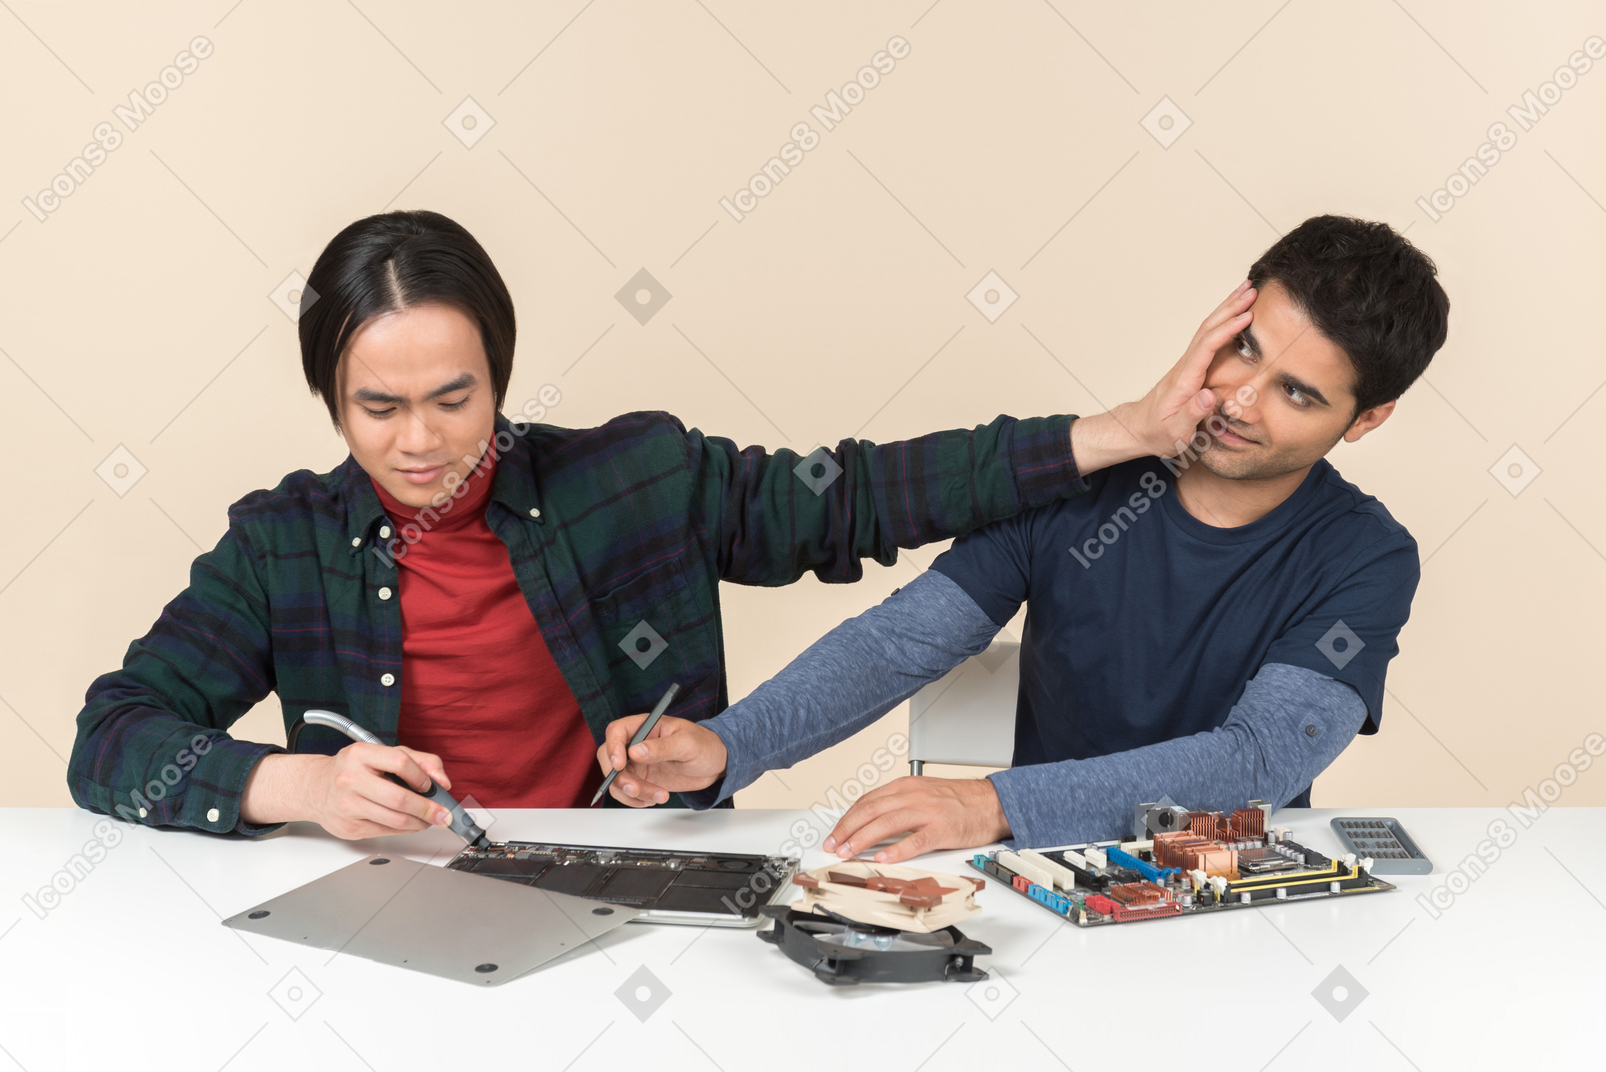 Two young geeks sitting at the table fixing something and one of them distracting other one